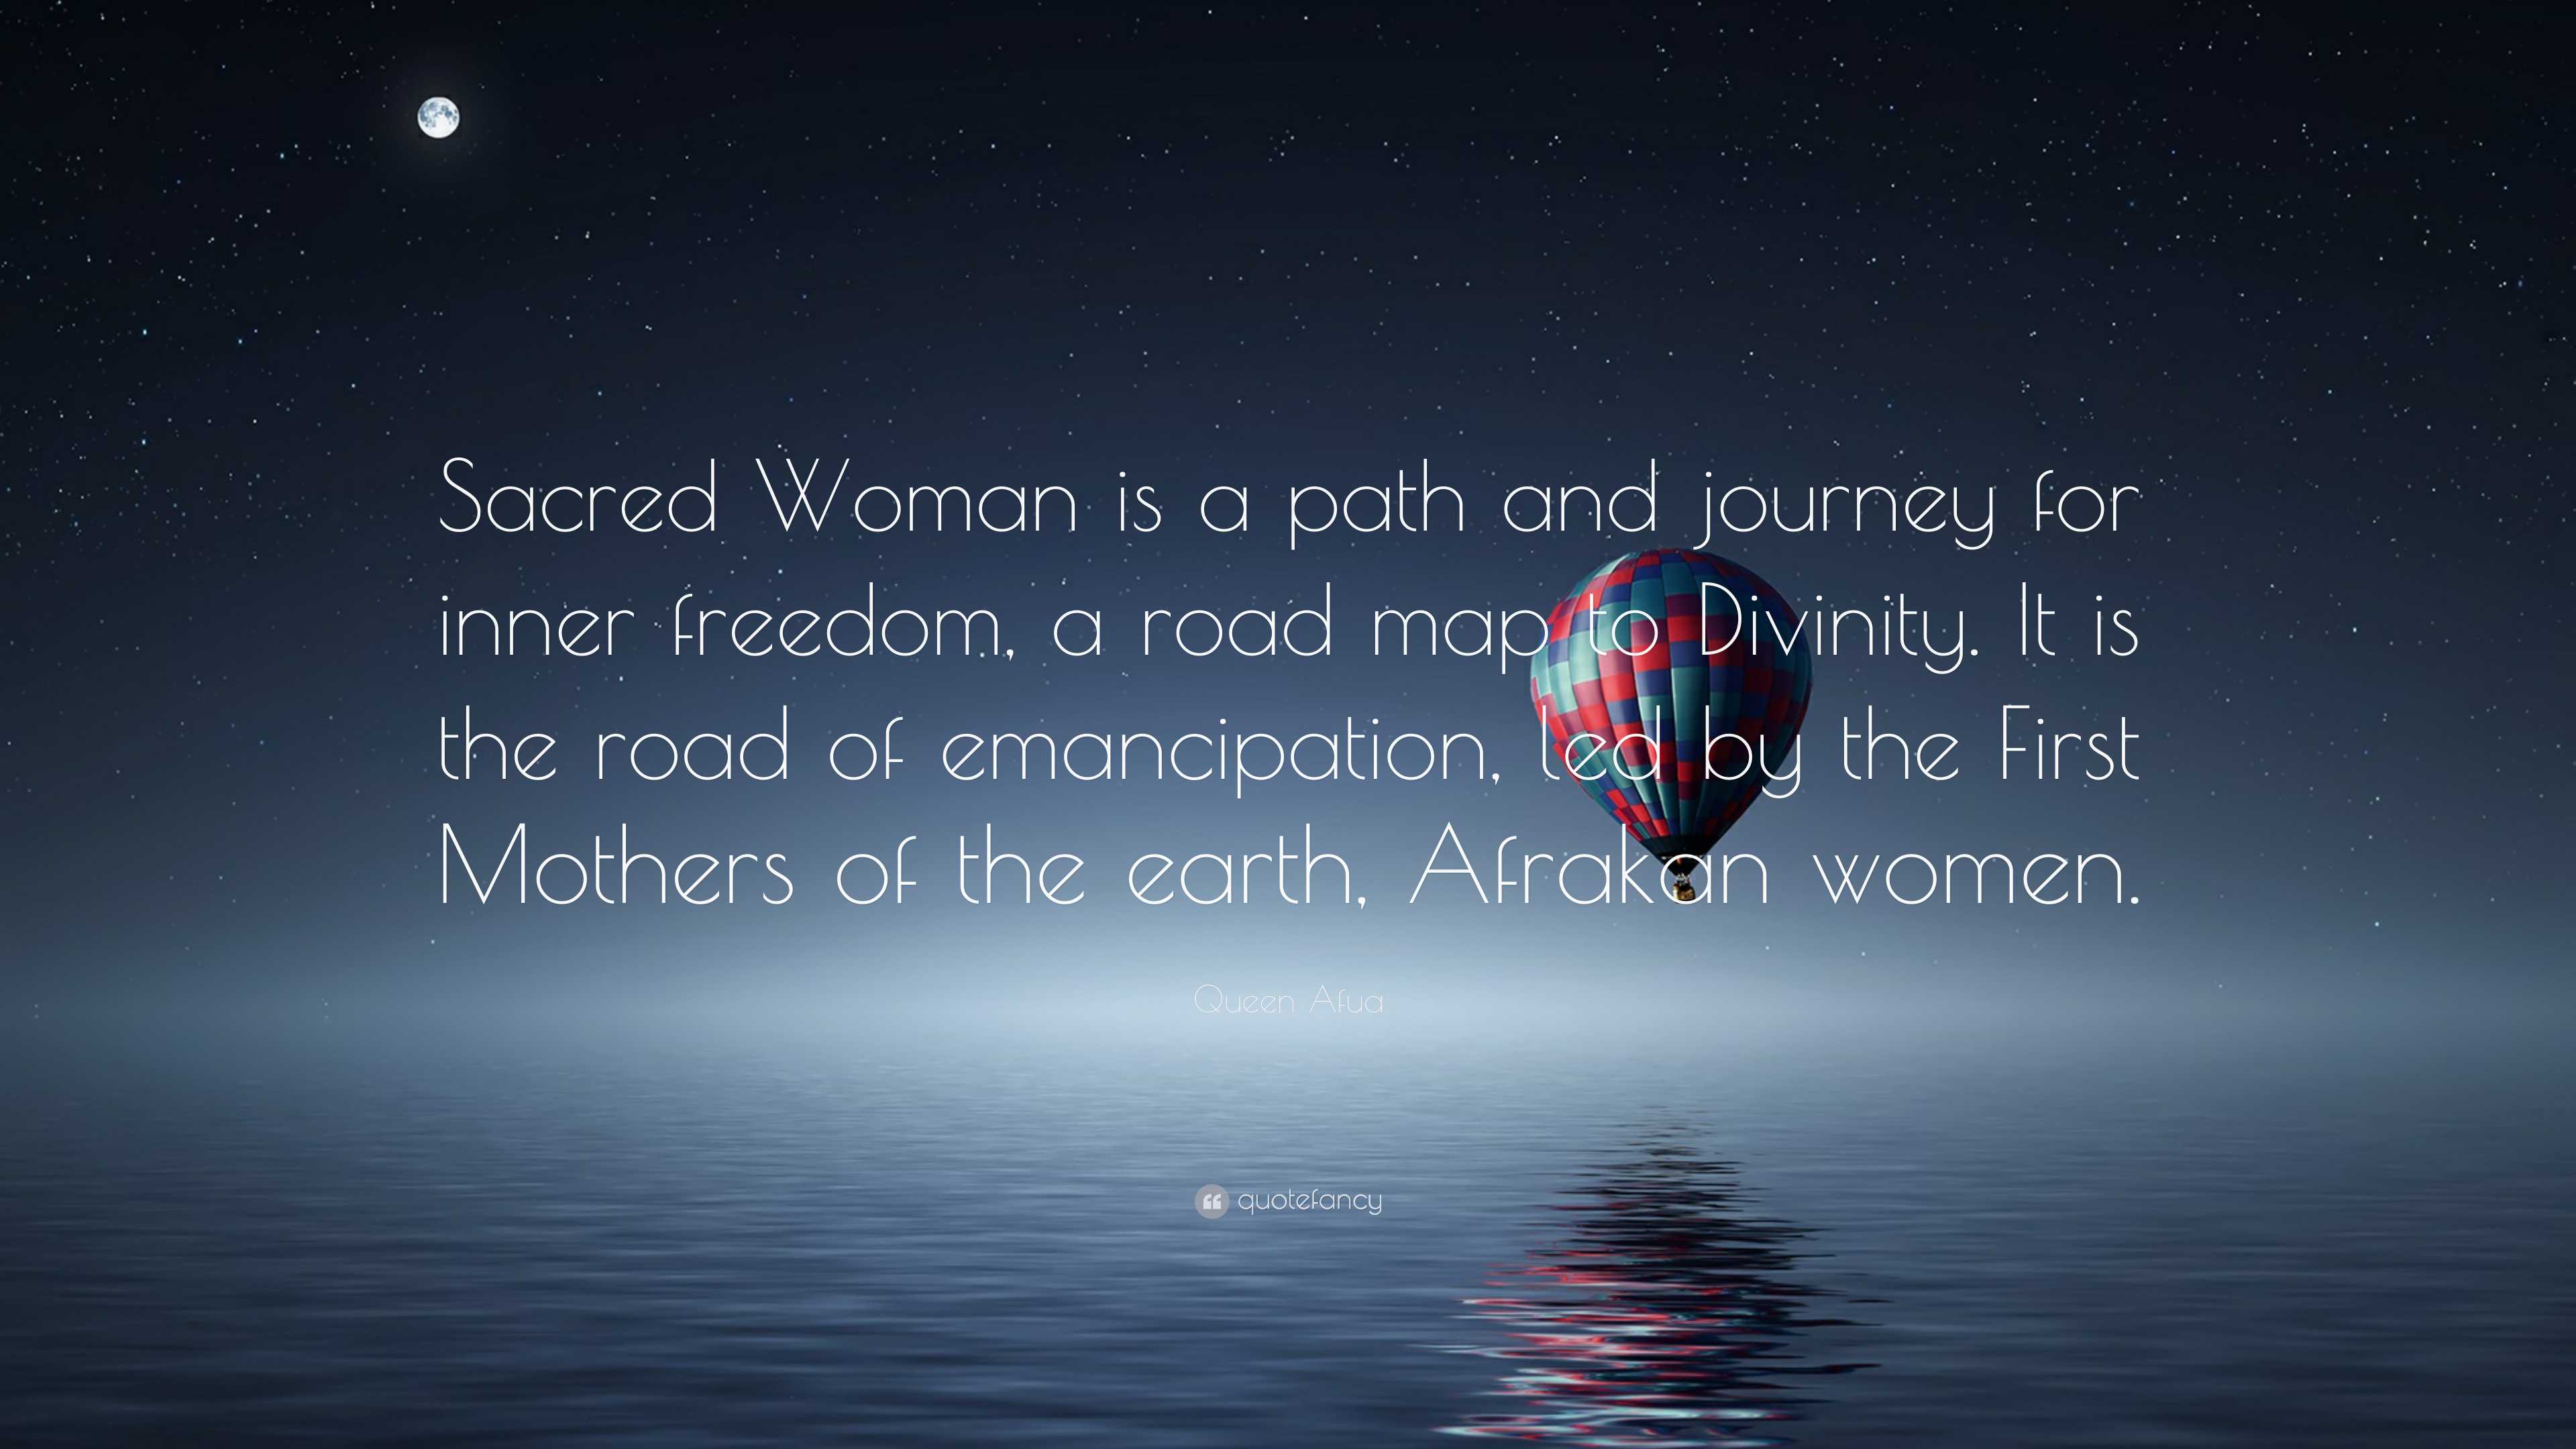 Queen Afua Quote: “Sacred Woman is a path and journey for inner freedom, a  road map to Divinity. It is the road of emancipation, led by the”